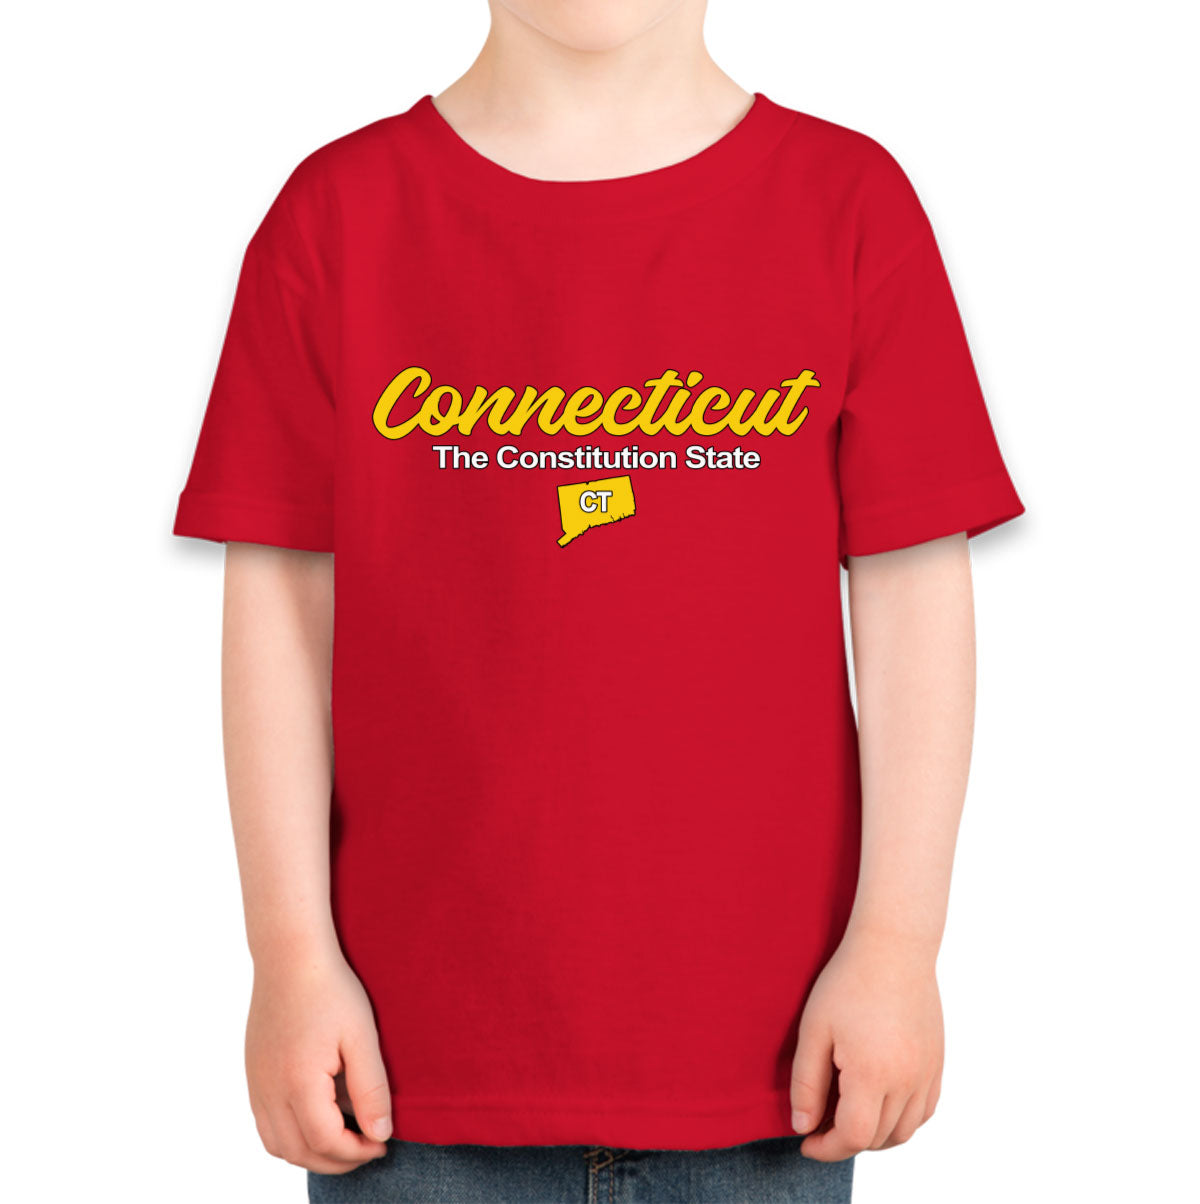 Connecticut The Constitution State Toddler T-shirt